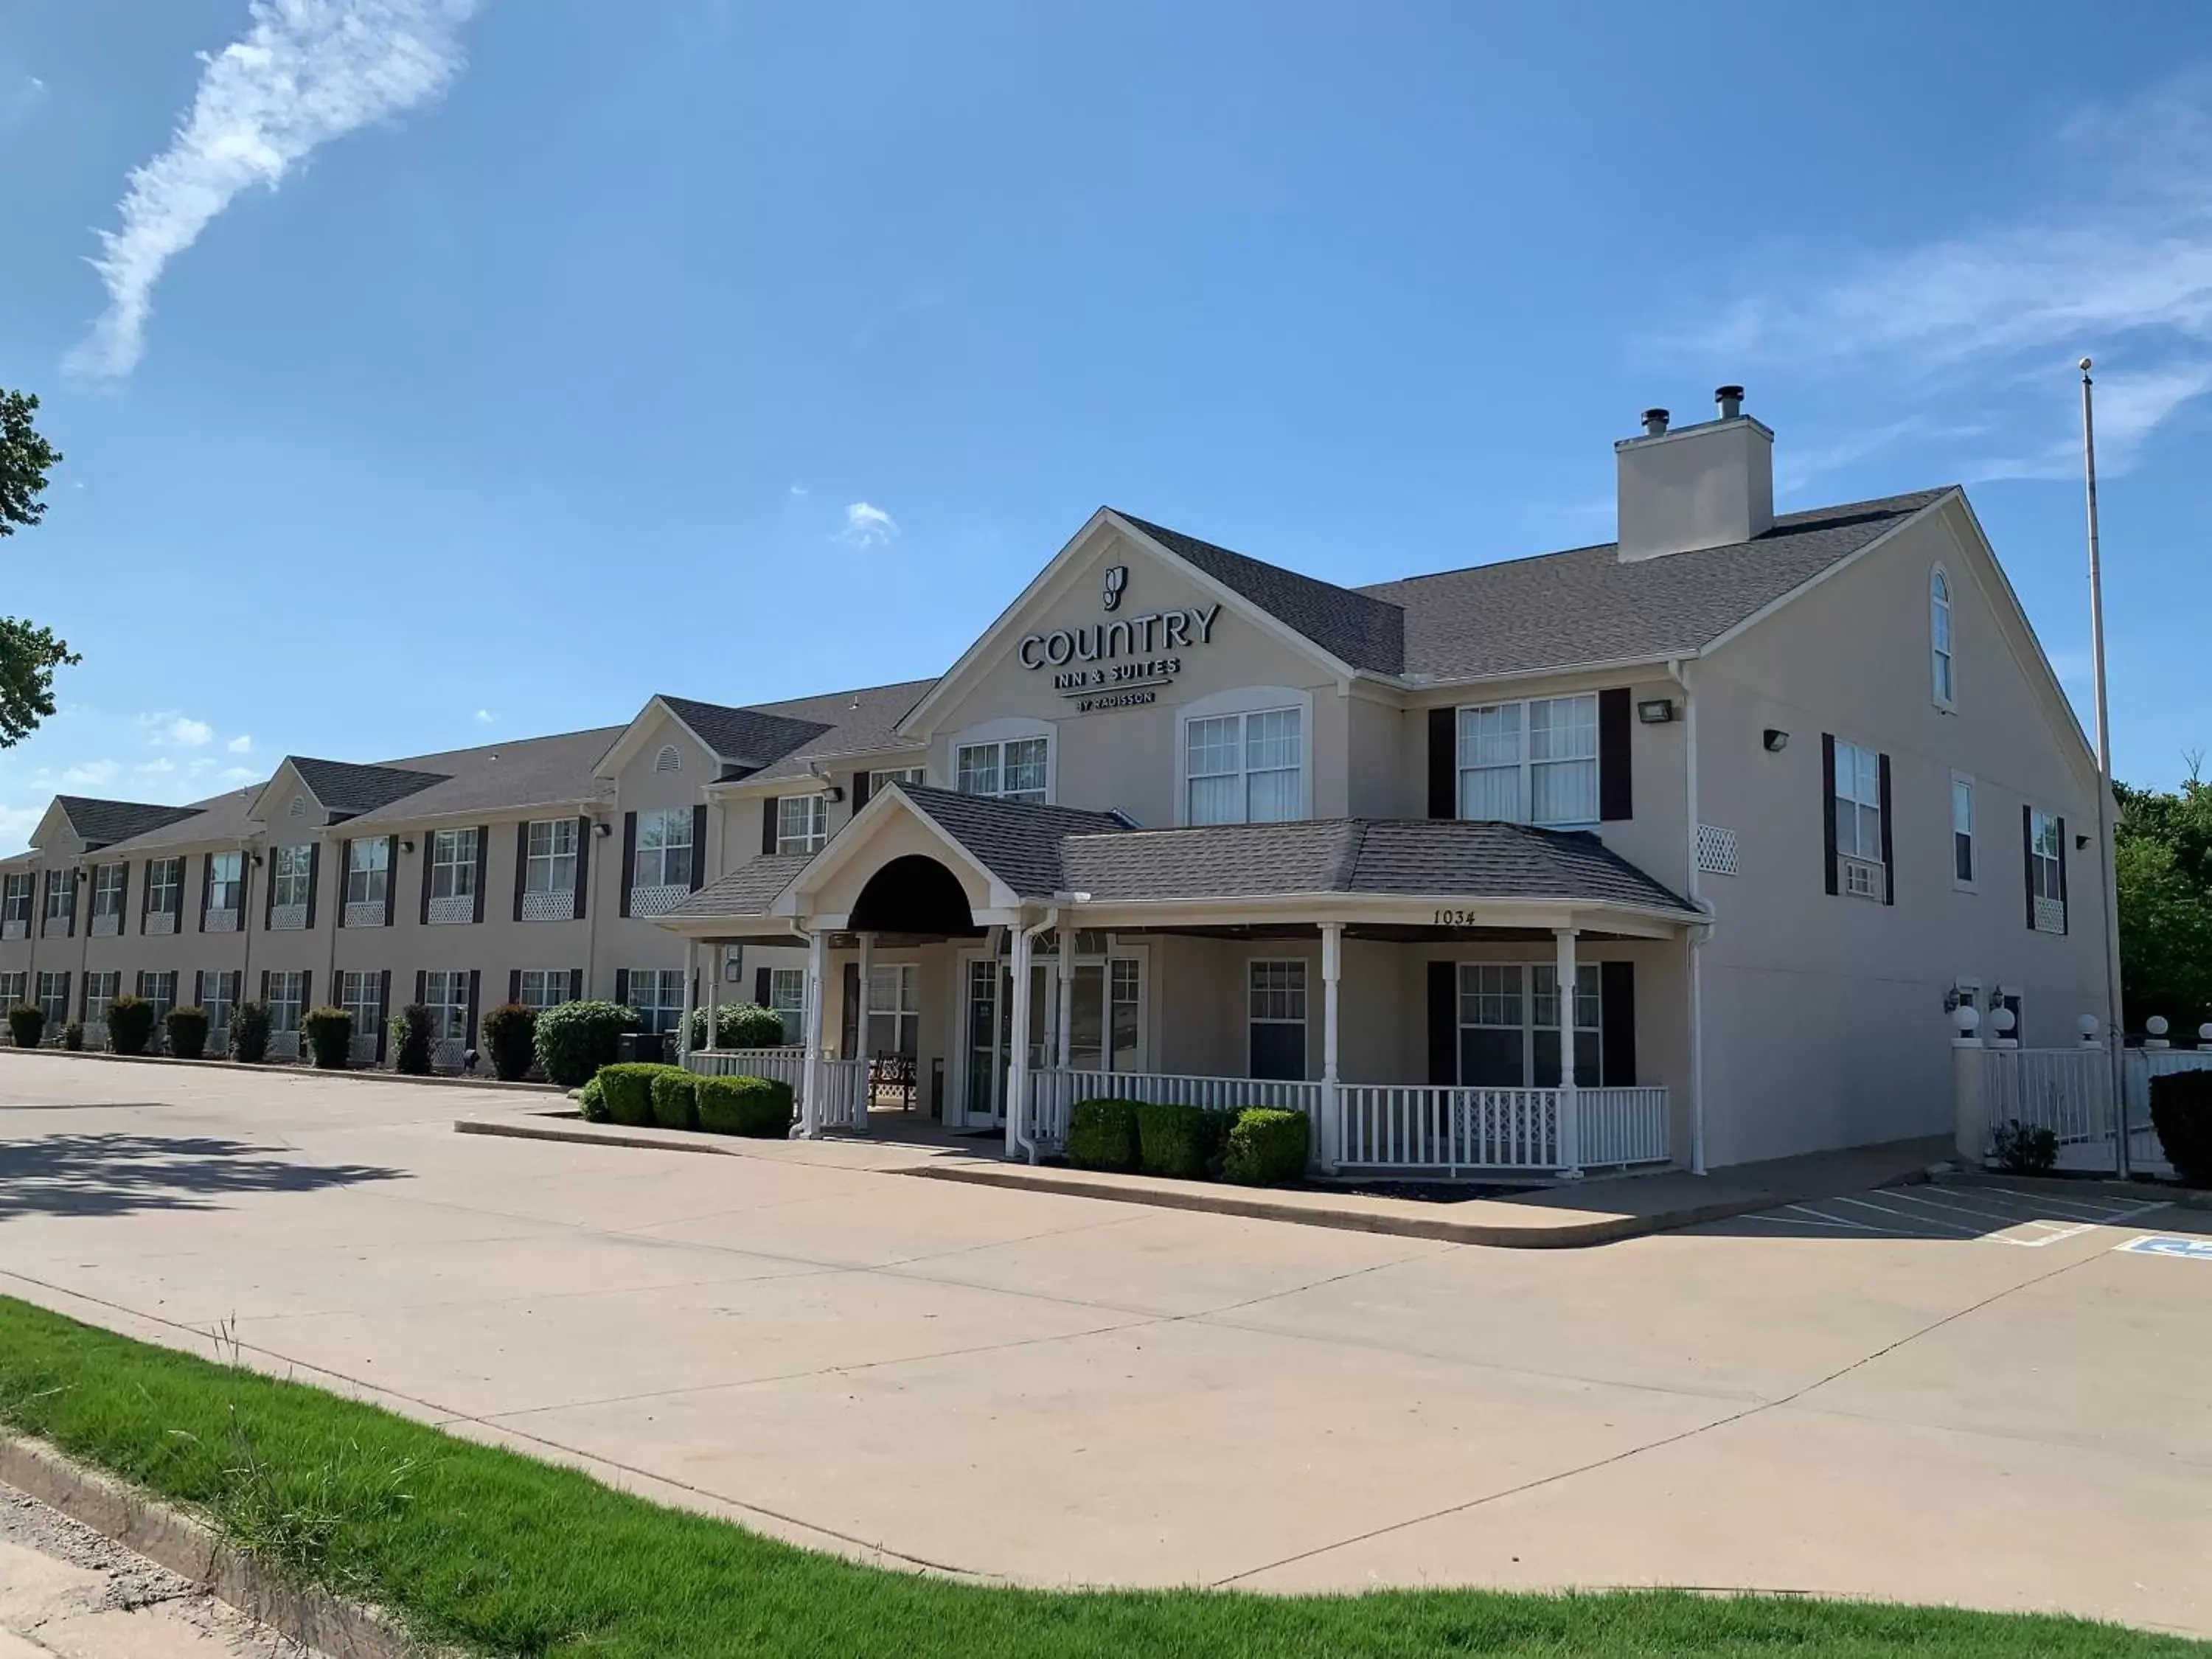 Facade/entrance, Property Building in Country Inn & Suites by Radisson, Tulsa, OK